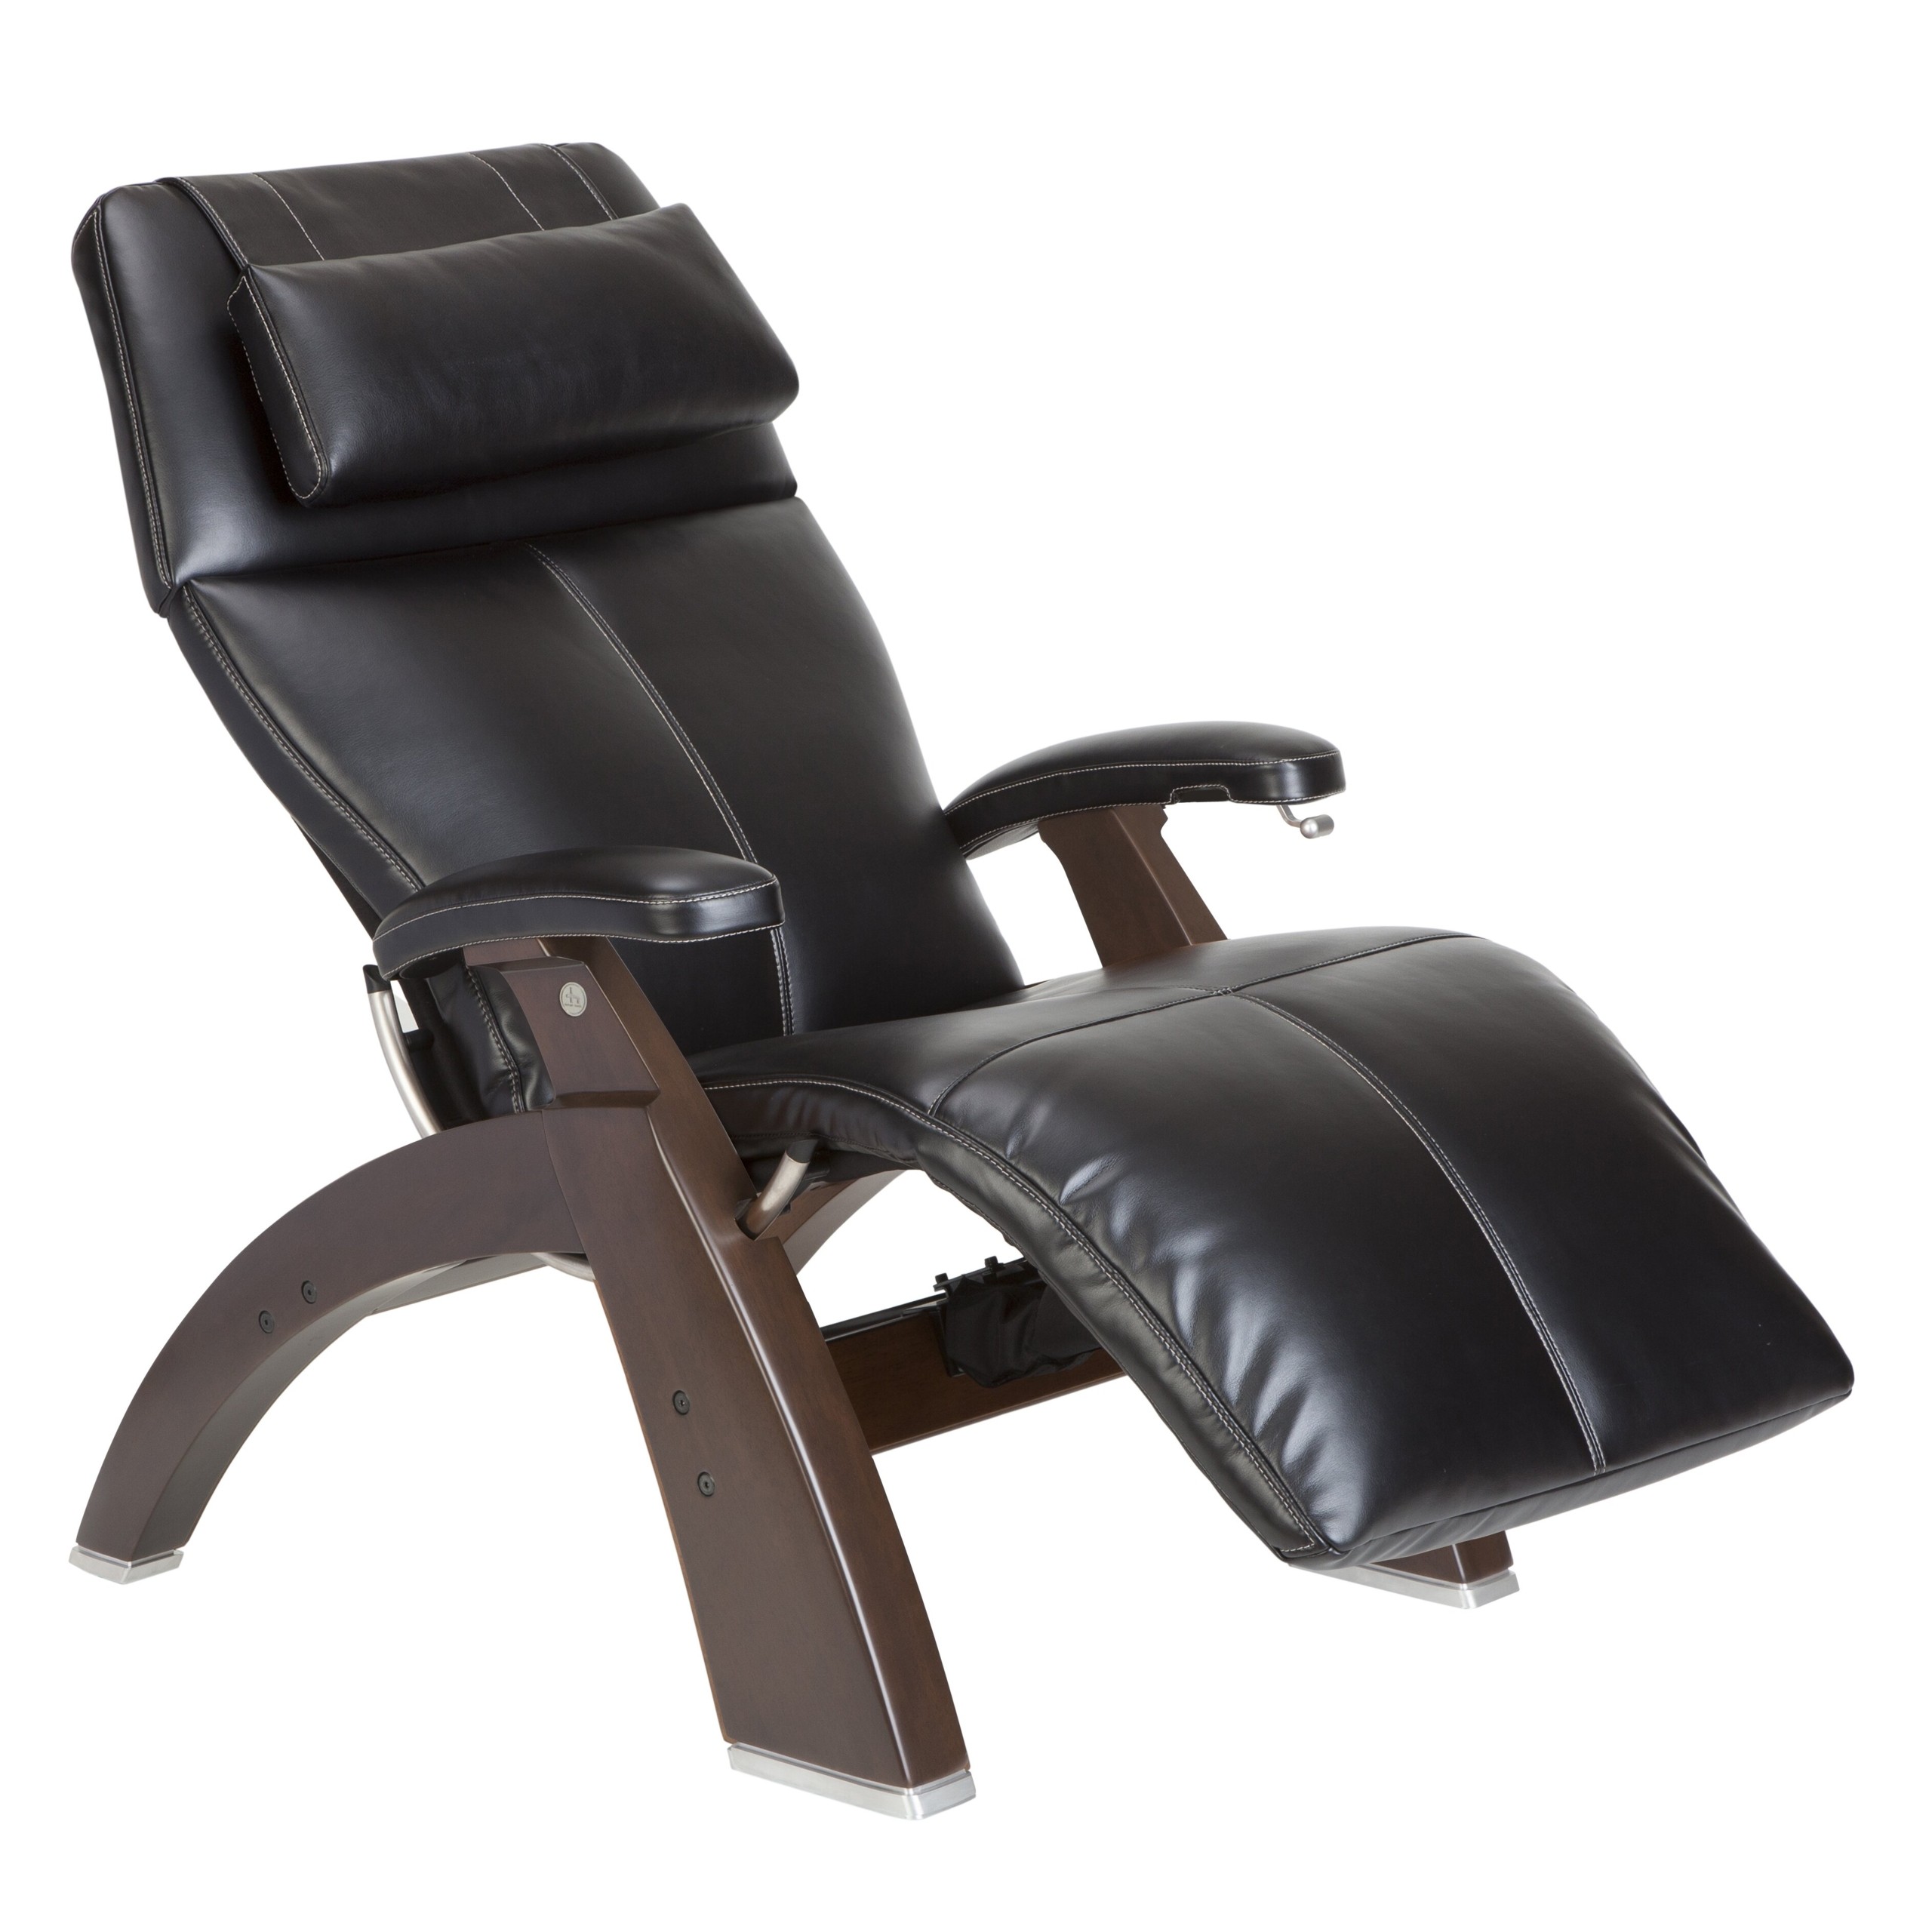 Human Touch Pc 410 Perfect Chair Series 2 Chestnut Manual Recline Wood Base Zero Gravity Recliner Black Vinyl Standard Ground Shipping Included 